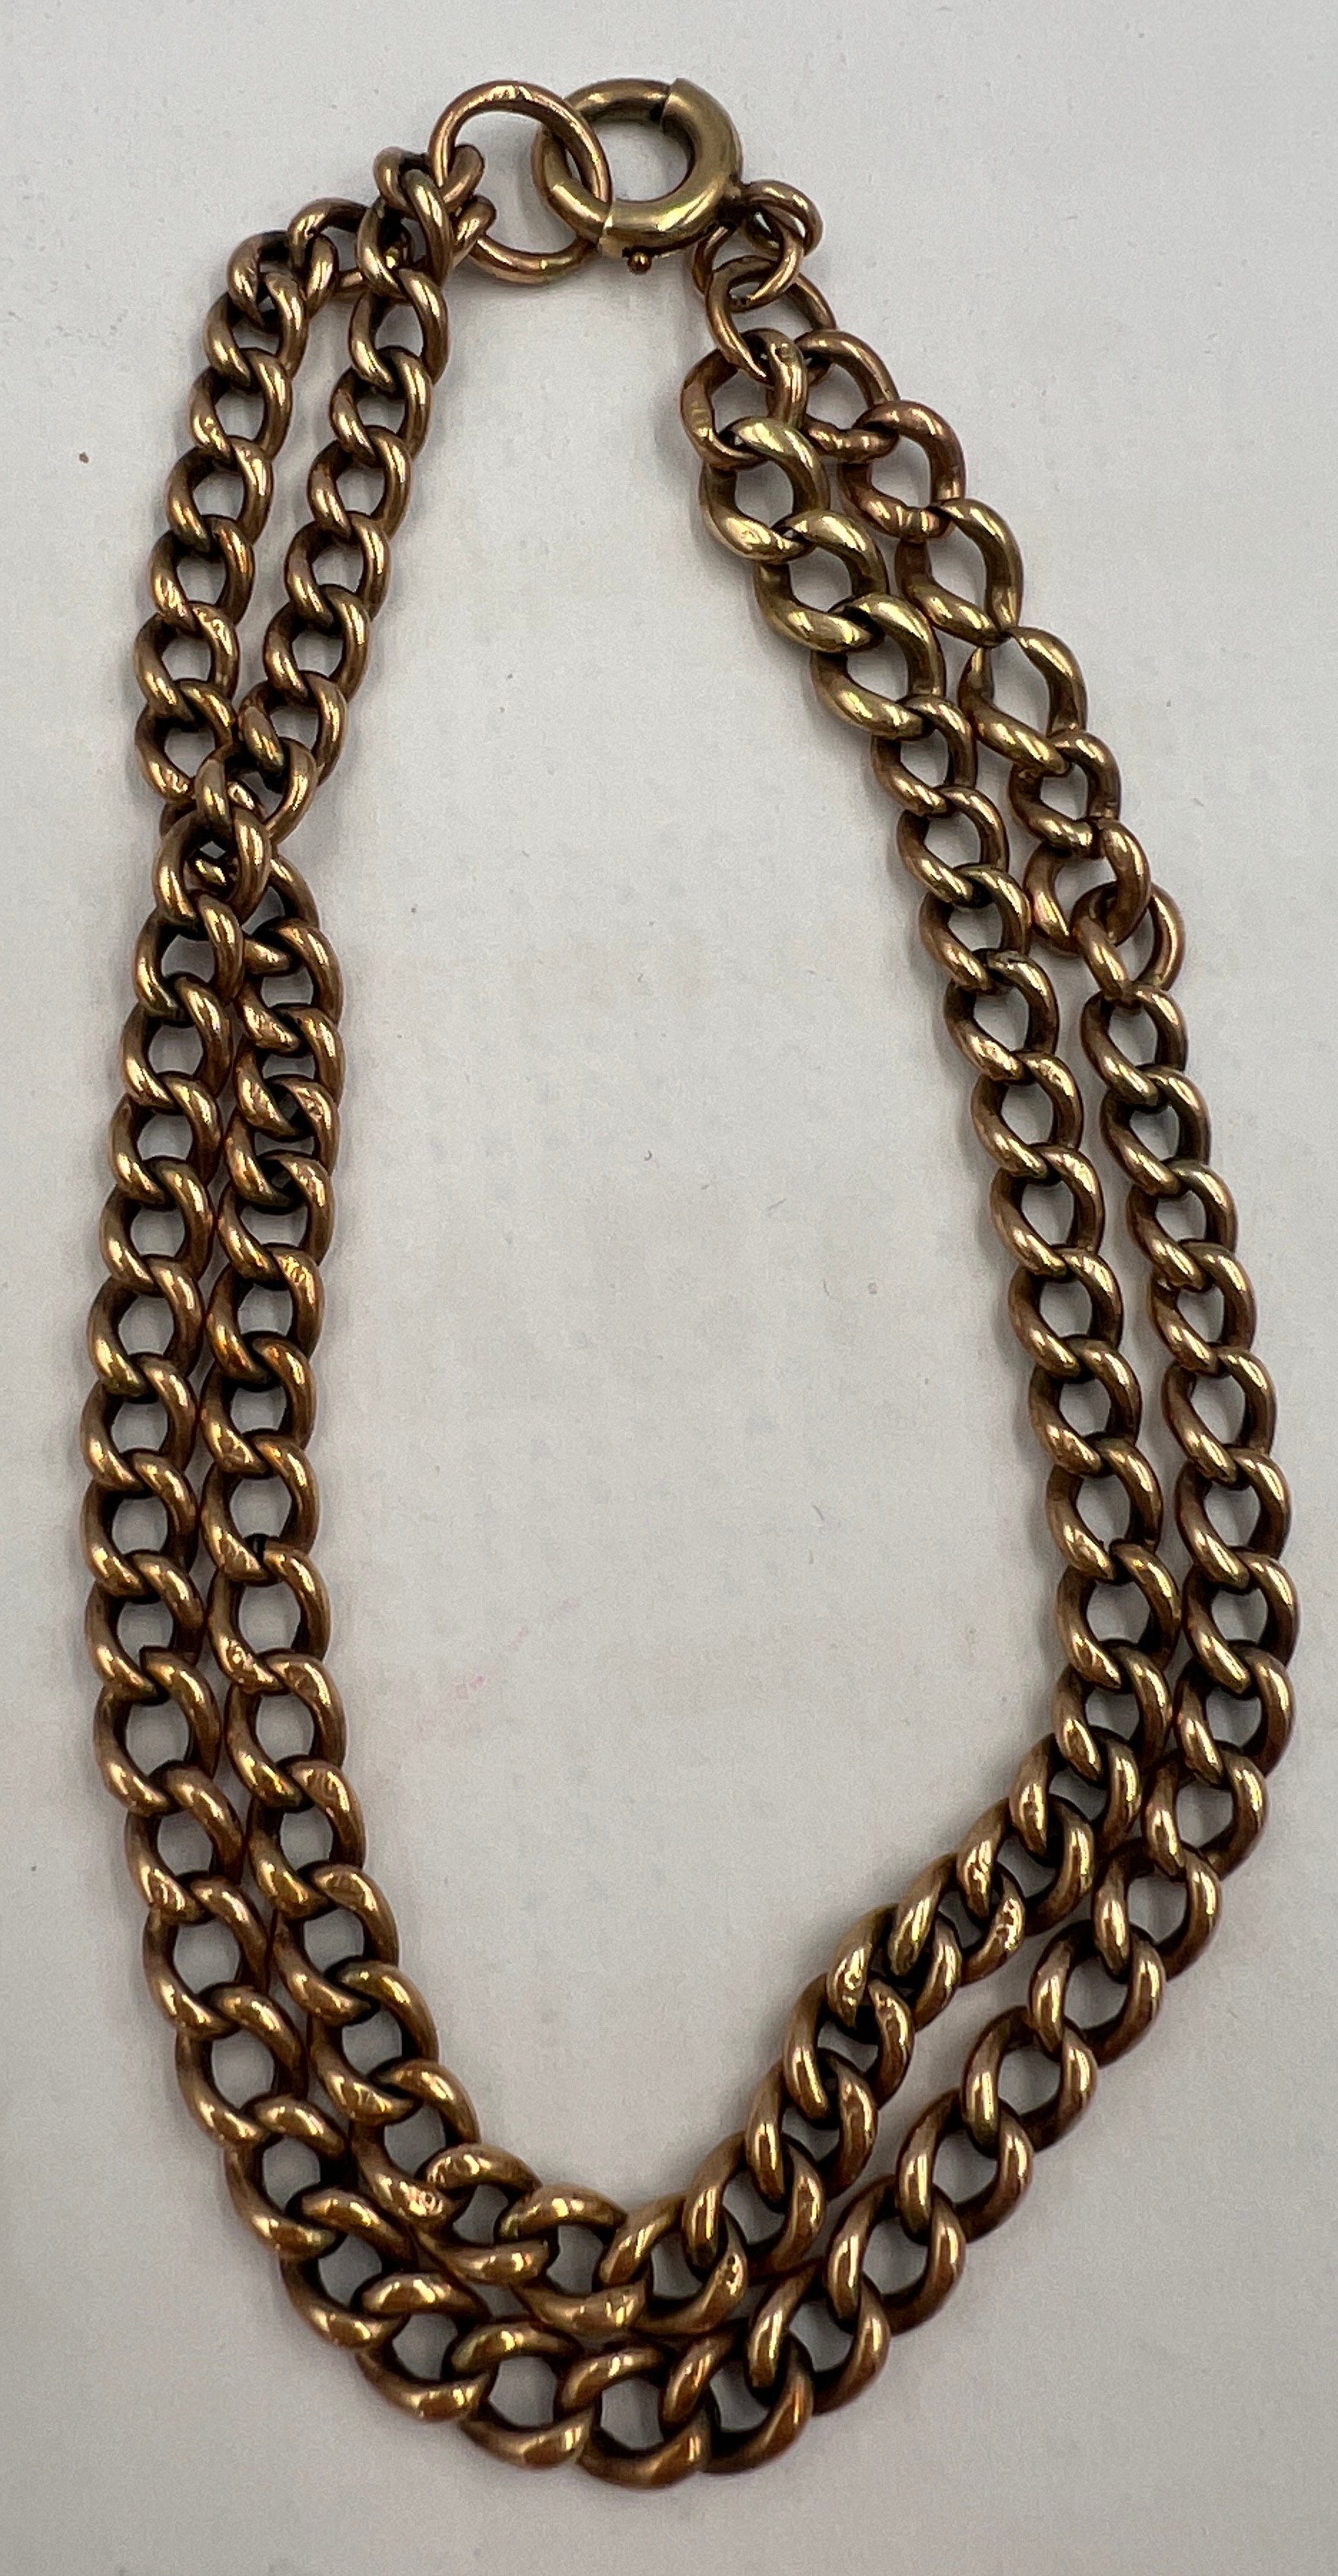 A 9 carat gold double chain bracelet. Weight 11.9gm.